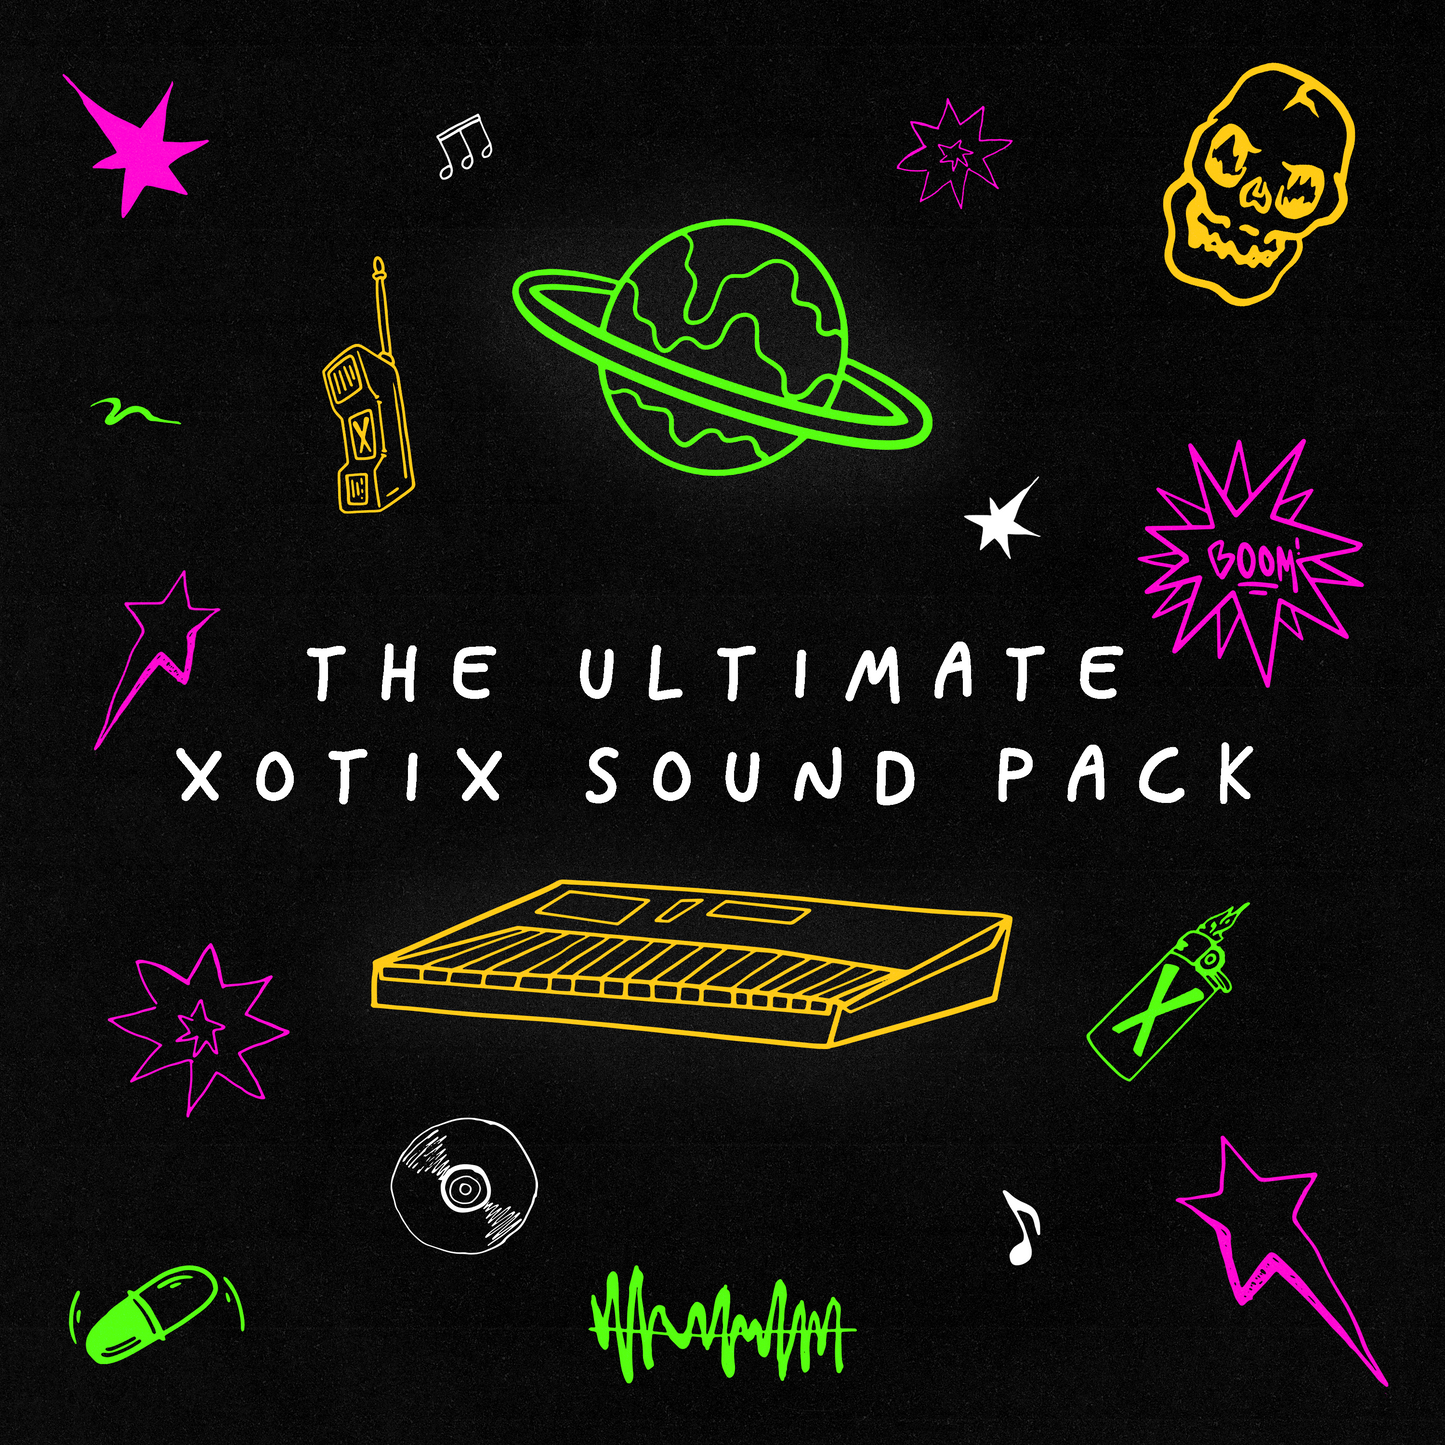 THE ULTIMATE XOTIX SOUND PACK VOL. 1